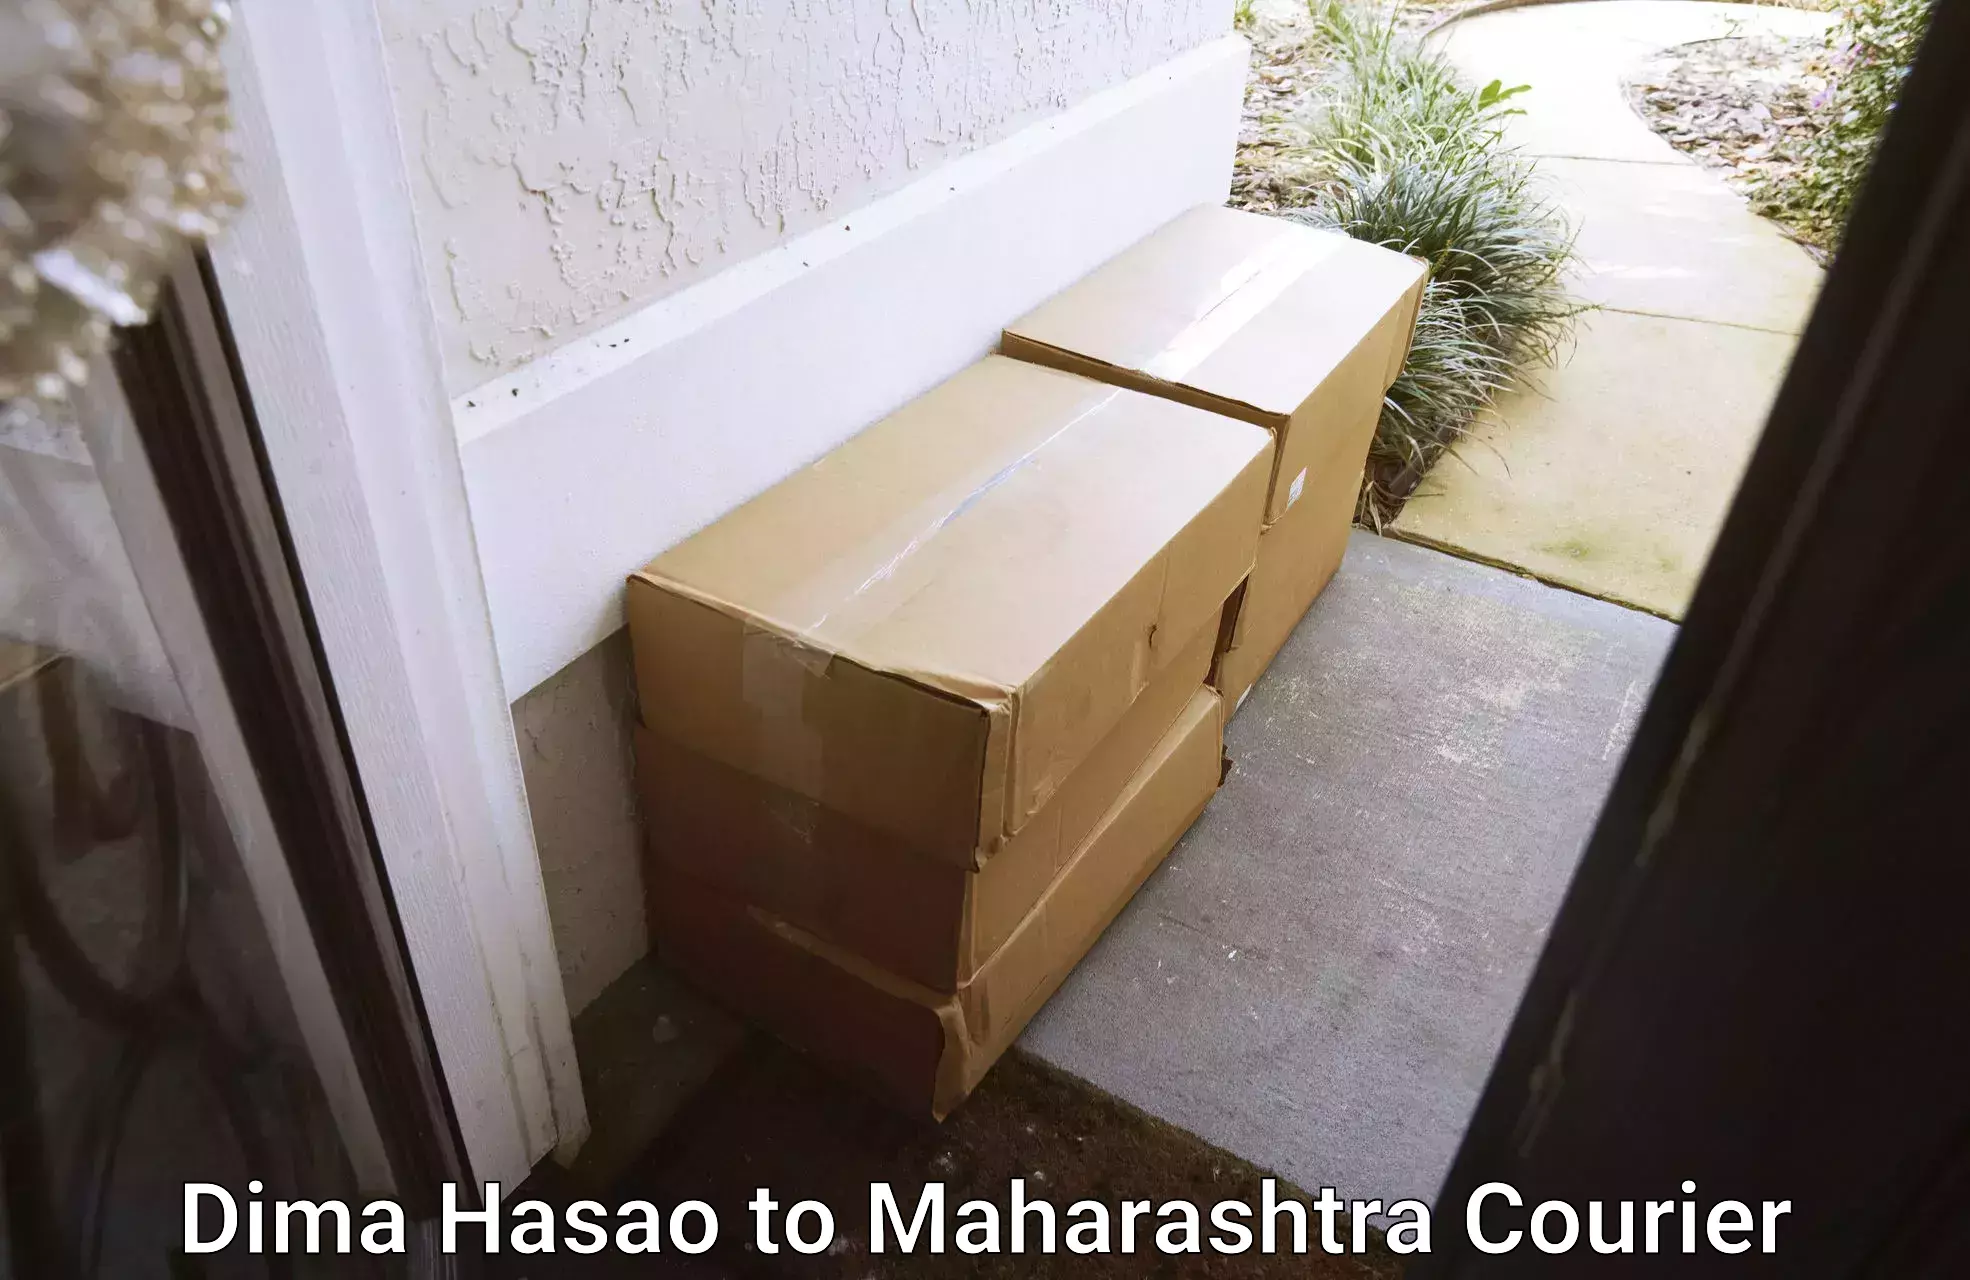 Subscription-based courier Dima Hasao to Worli